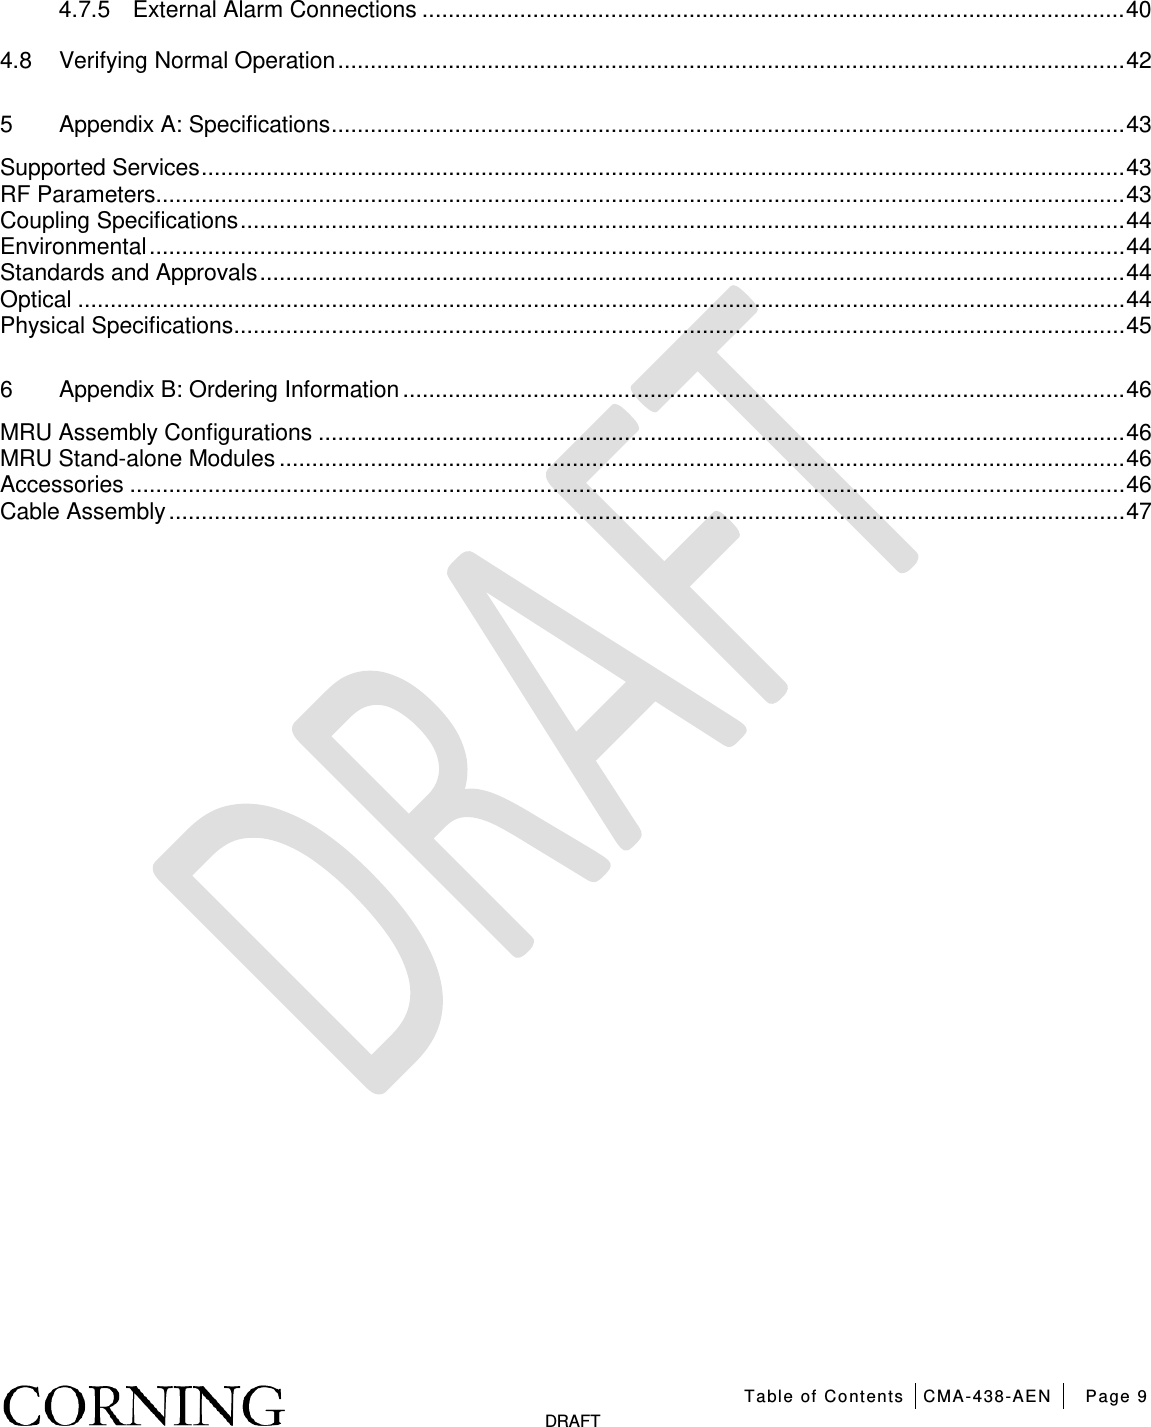   Table of Contents CMA-438-AEN Page 9   DRAFT 4.7.5 External Alarm Connections ............................................................................................................ 40 4.8 Verifying Normal Operation ......................................................................................................................... 42 5 Appendix A: Specifications .......................................................................................................................... 43 Supported Services .............................................................................................................................................. 43 RF Parameters ..................................................................................................................................................... 43 Coupling Specifications ........................................................................................................................................ 44 Environmental ...................................................................................................................................................... 44 Standards and Approvals ..................................................................................................................................... 44 Optical ................................................................................................................................................................. 44 Physical Specifications ......................................................................................................................................... 45 6 Appendix B: Ordering Information ............................................................................................................... 46 MRU Assembly Configurations ............................................................................................................................ 46 MRU Stand-alone Modules .................................................................................................................................. 46 Accessories ......................................................................................................................................................... 46 Cable Assembly ................................................................................................................................................... 47    